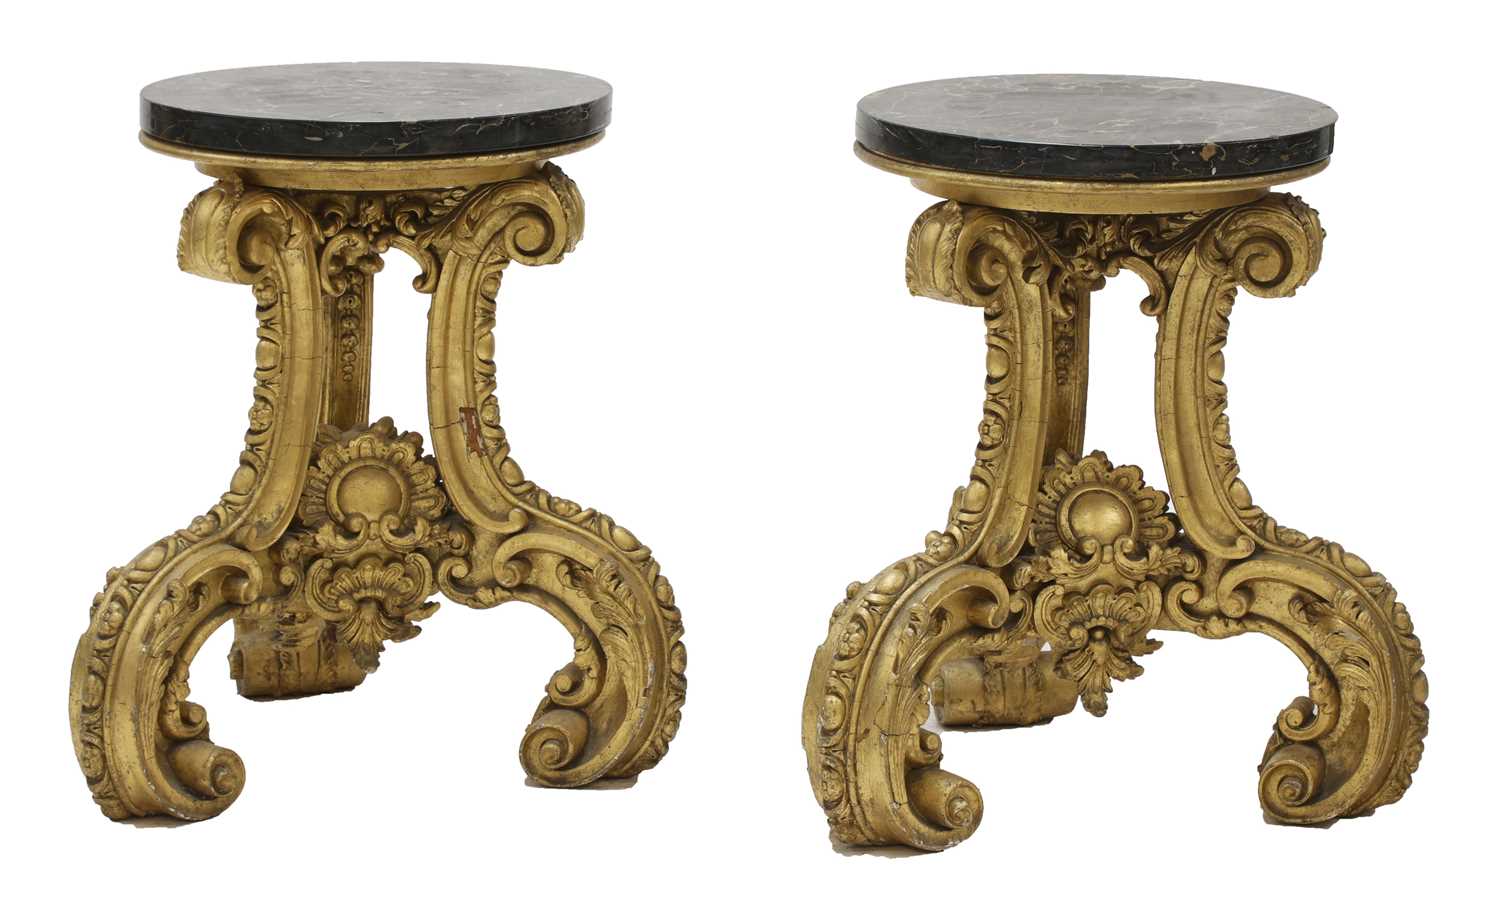 Lot 282 - A pair of ornately carved giltwood stands